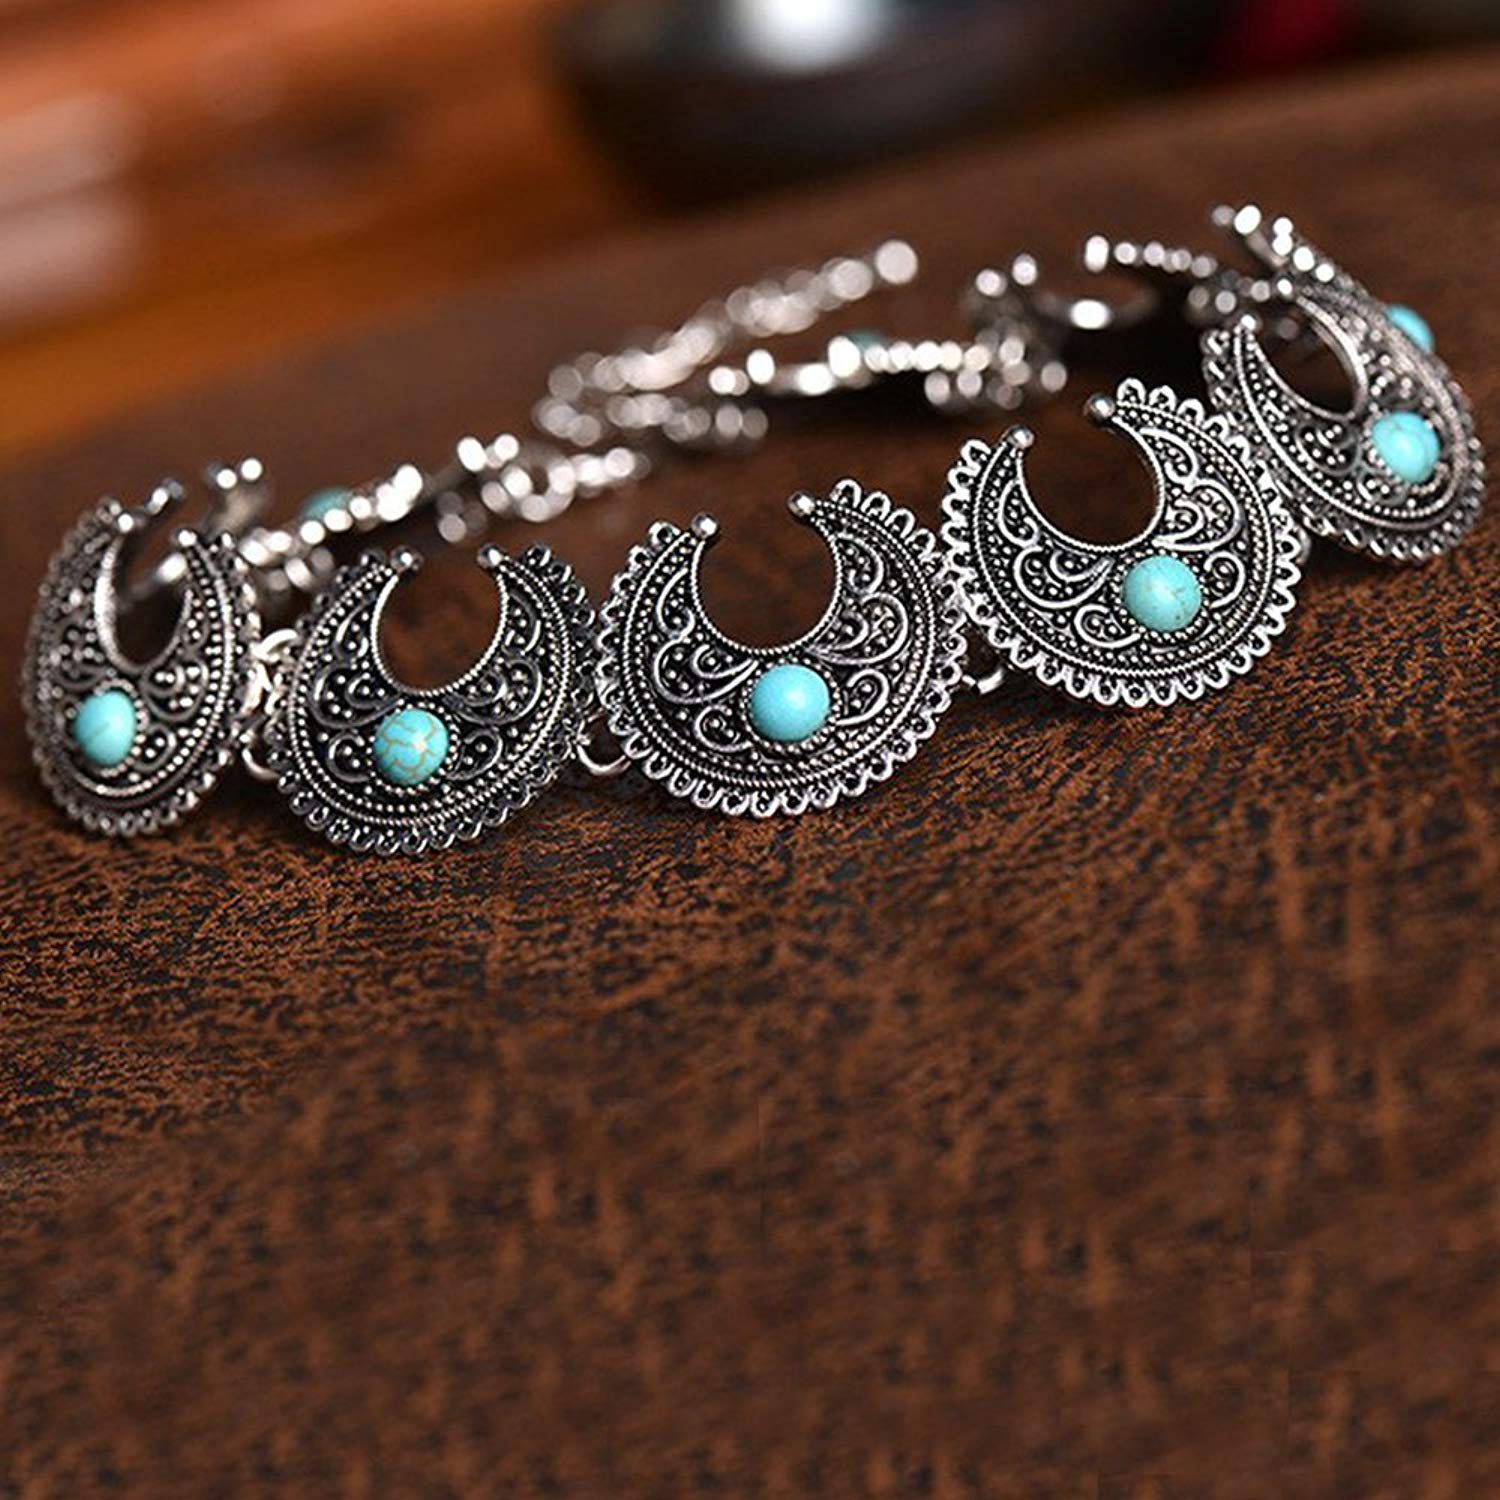     			Zivom Chand Bali Oxidised Tribal Bohemian German Silver Turquoise Blue Coller Necklace Chain Women